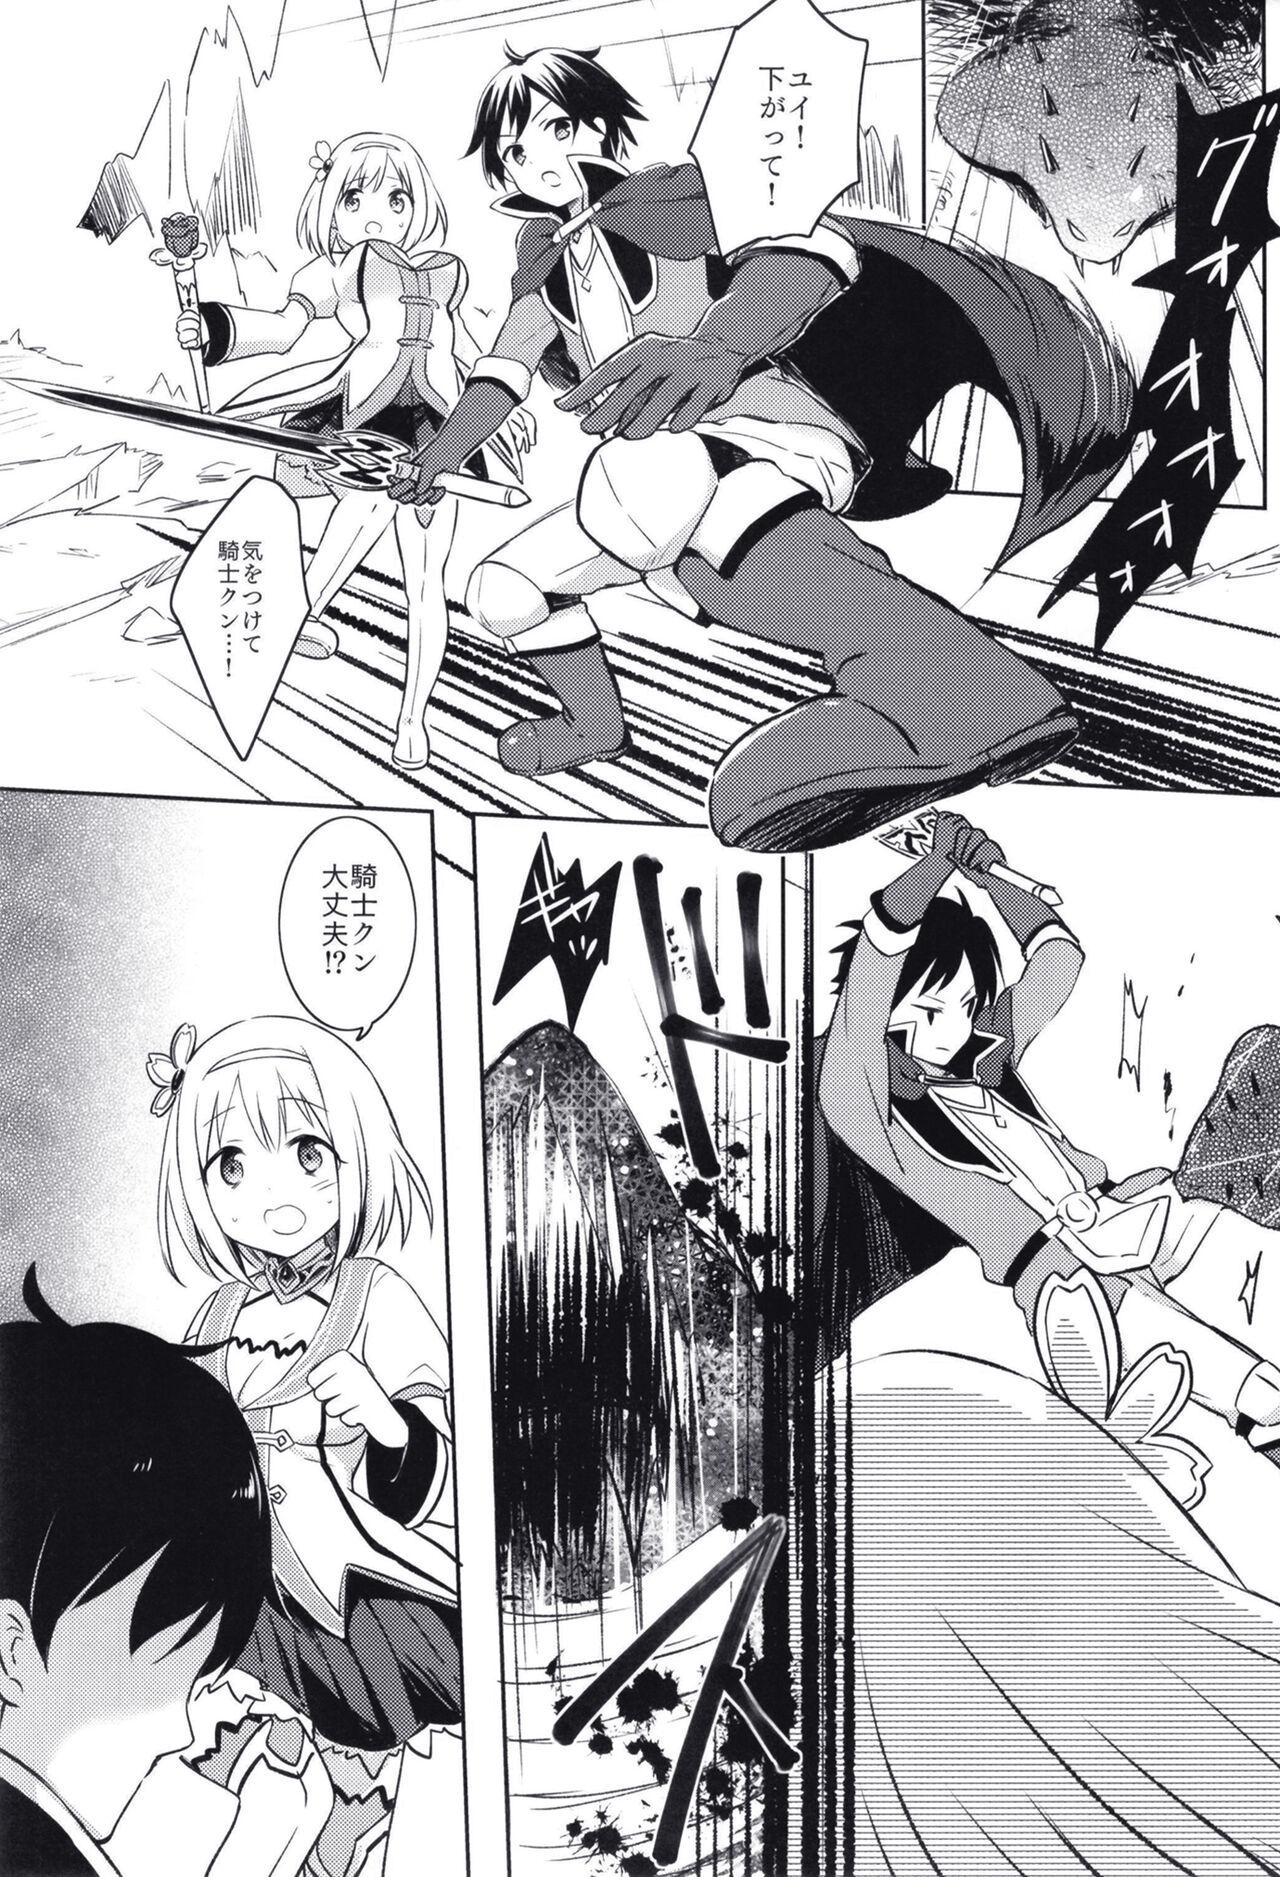 Married Yui to Icha Love True End!? - Princess connect Abg - Page 3